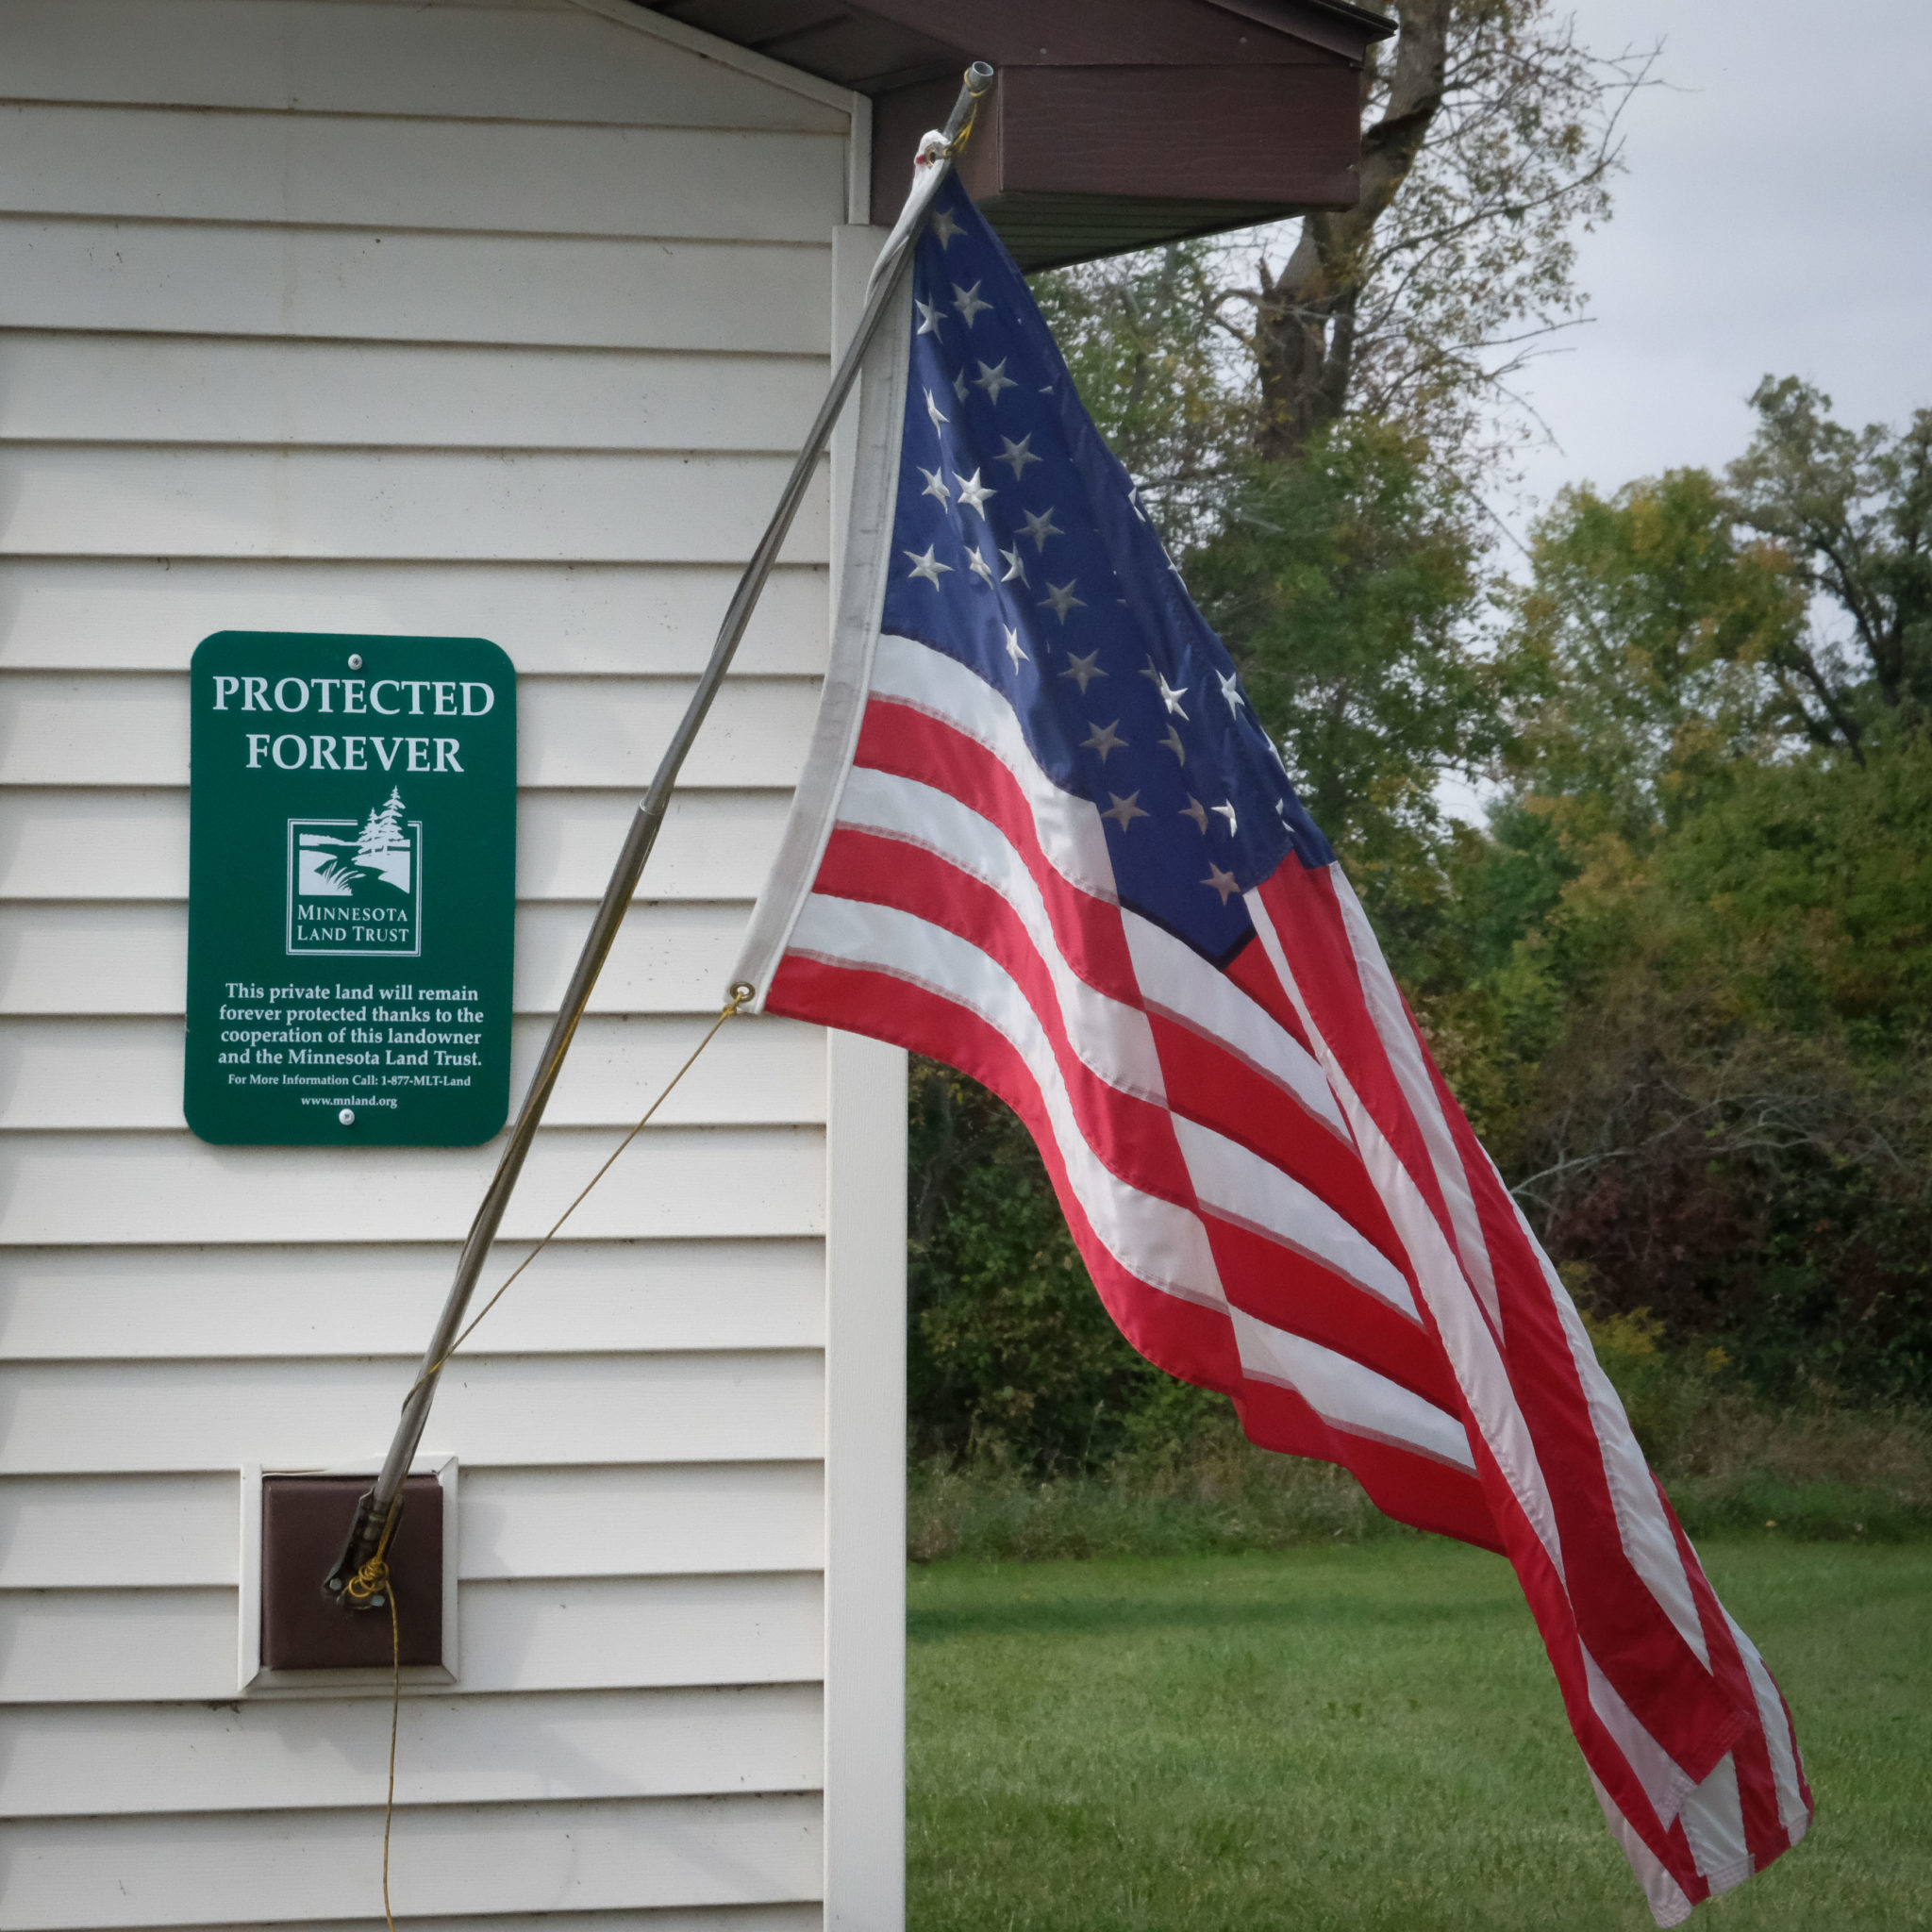 American flag flying next to a Minnesota Land Trust Protected Forever sign